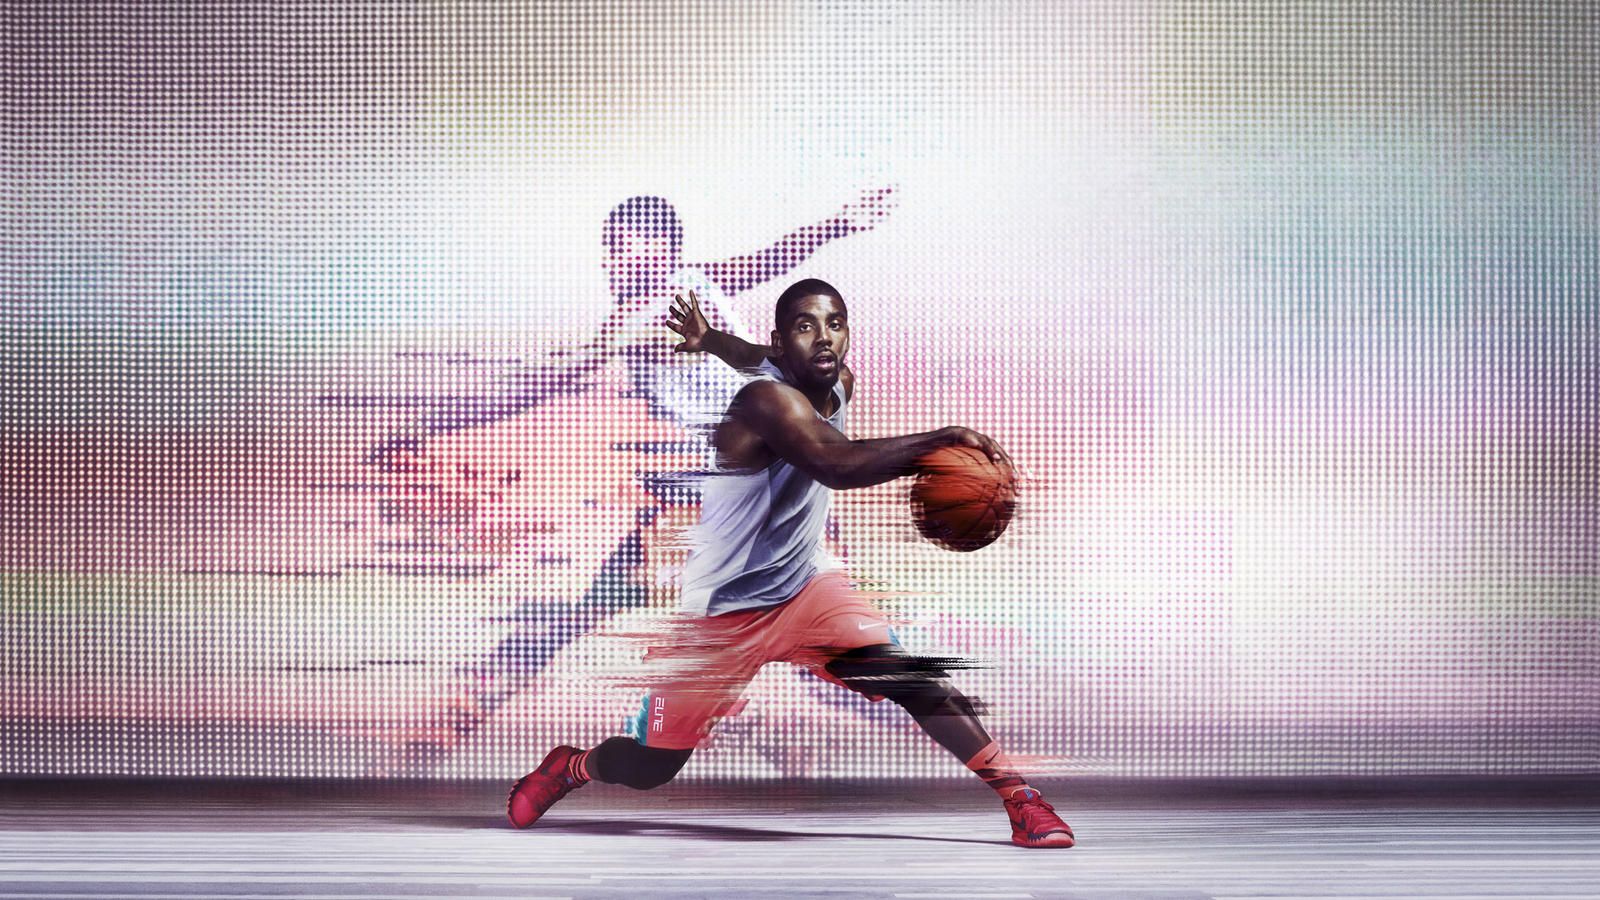 Wallpaper ID 1573059  usa 4K kyrie irving basketball backgrounds NBA  free download